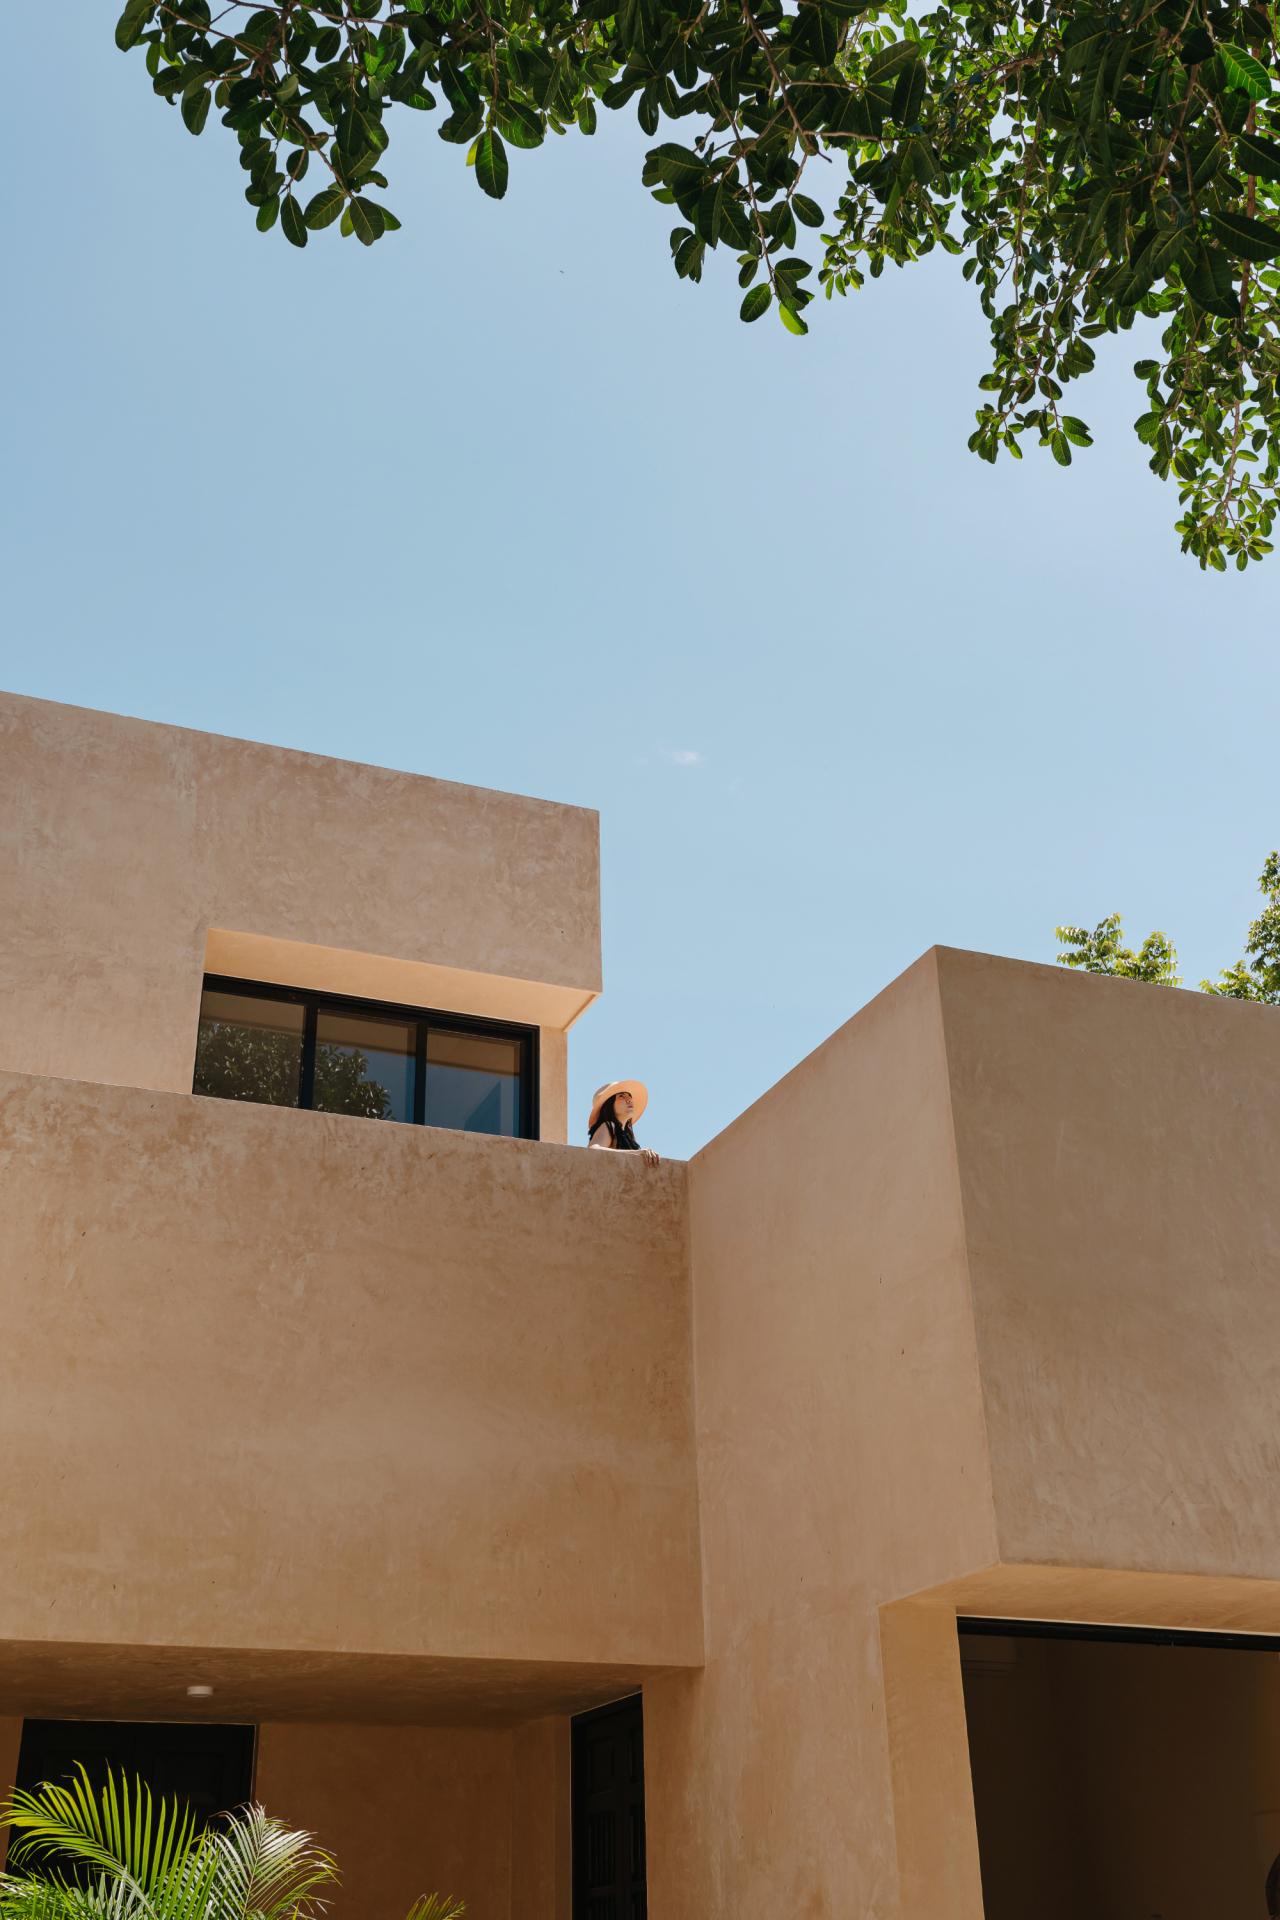 A 20th-century house in Merida, Mexico gets a fresh makeover